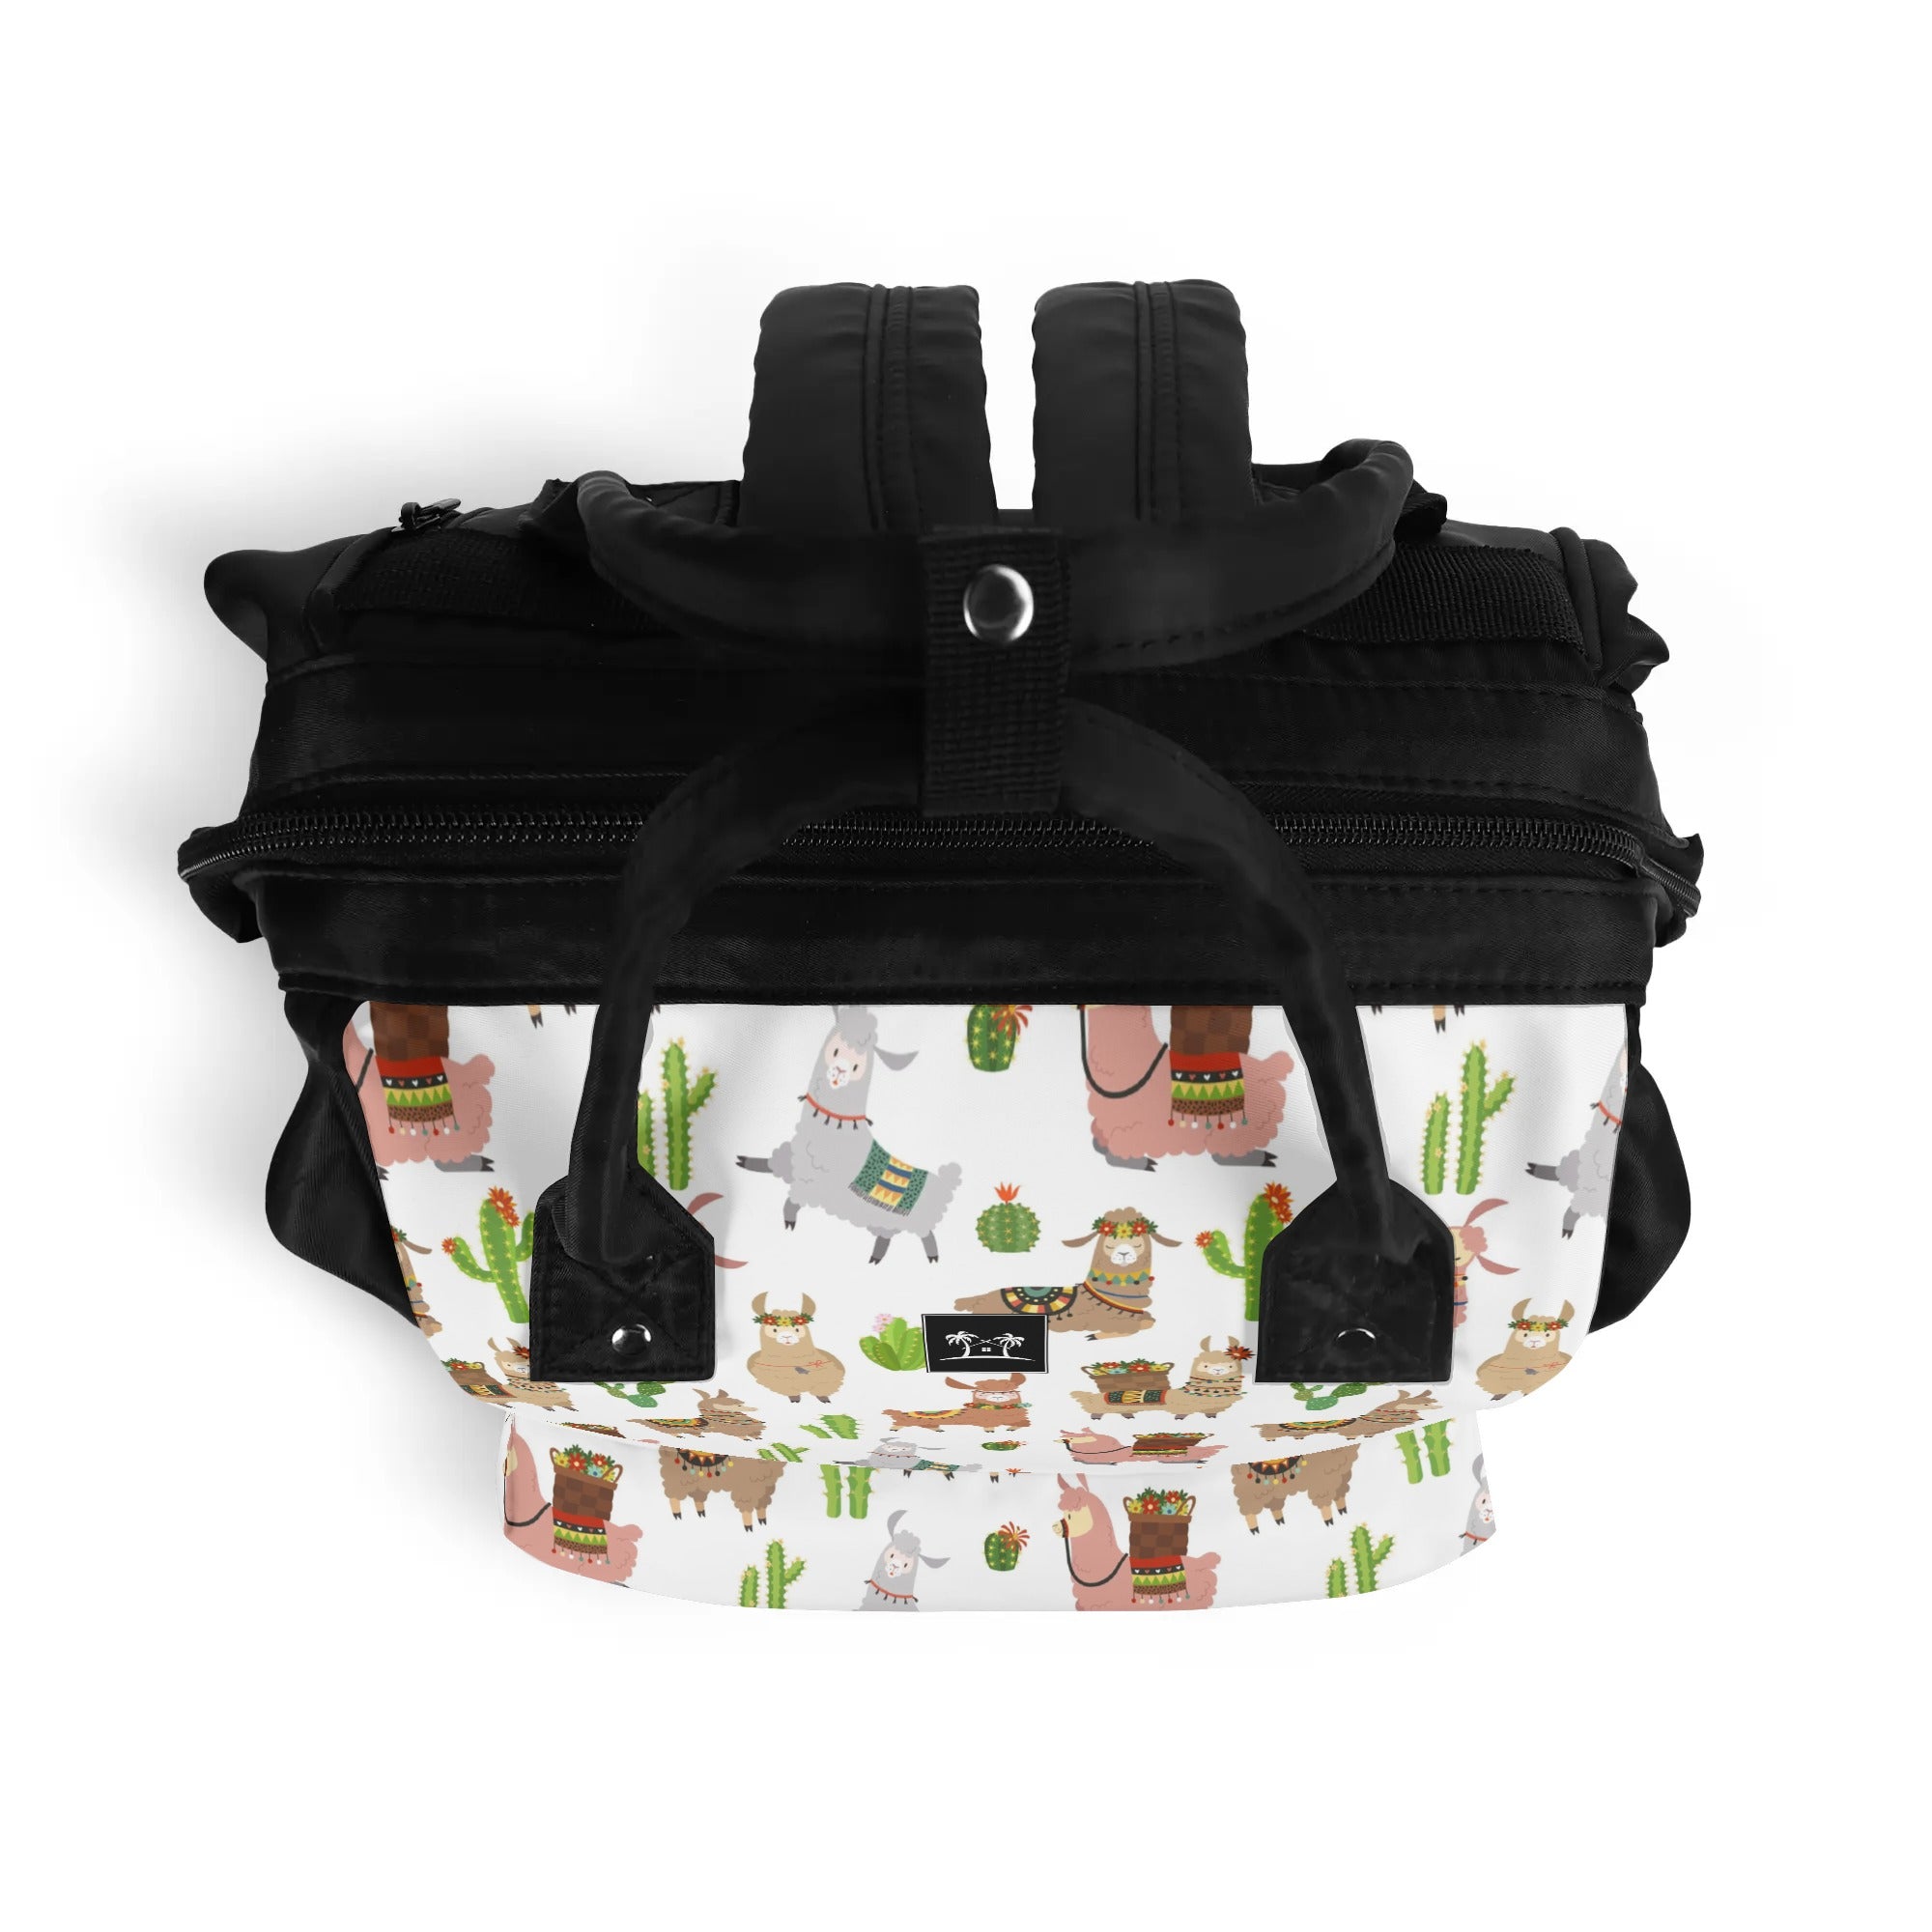 Large Capacity Diaper Backpack - A Pack-a Alpacas